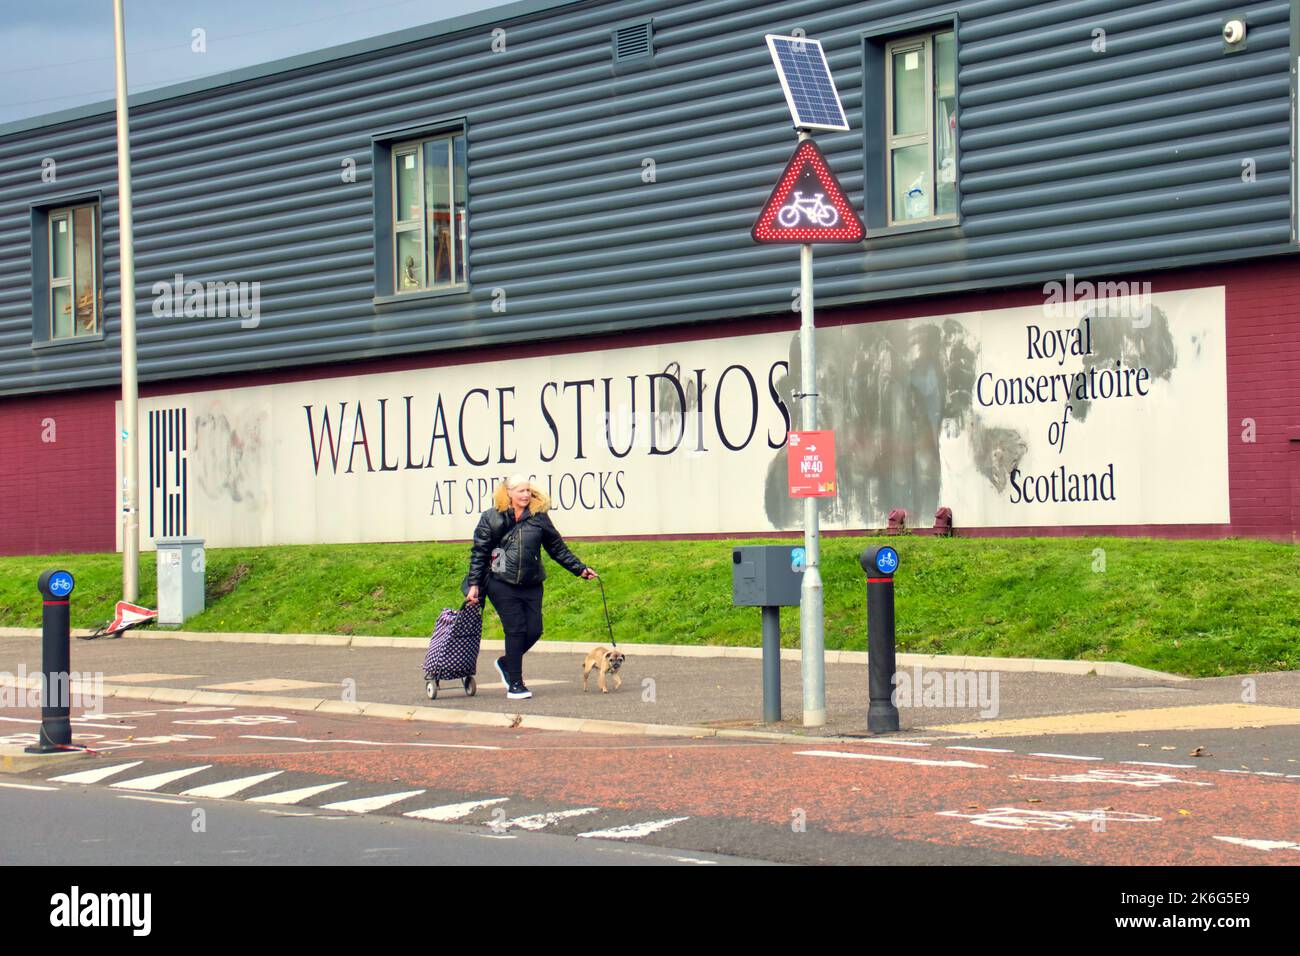 Royal Conservatoire of Scotland  Wallace Studios Campus at  Speirs Locks. new cycle path lights system Glasgow, Scotland, UK Stock Photo